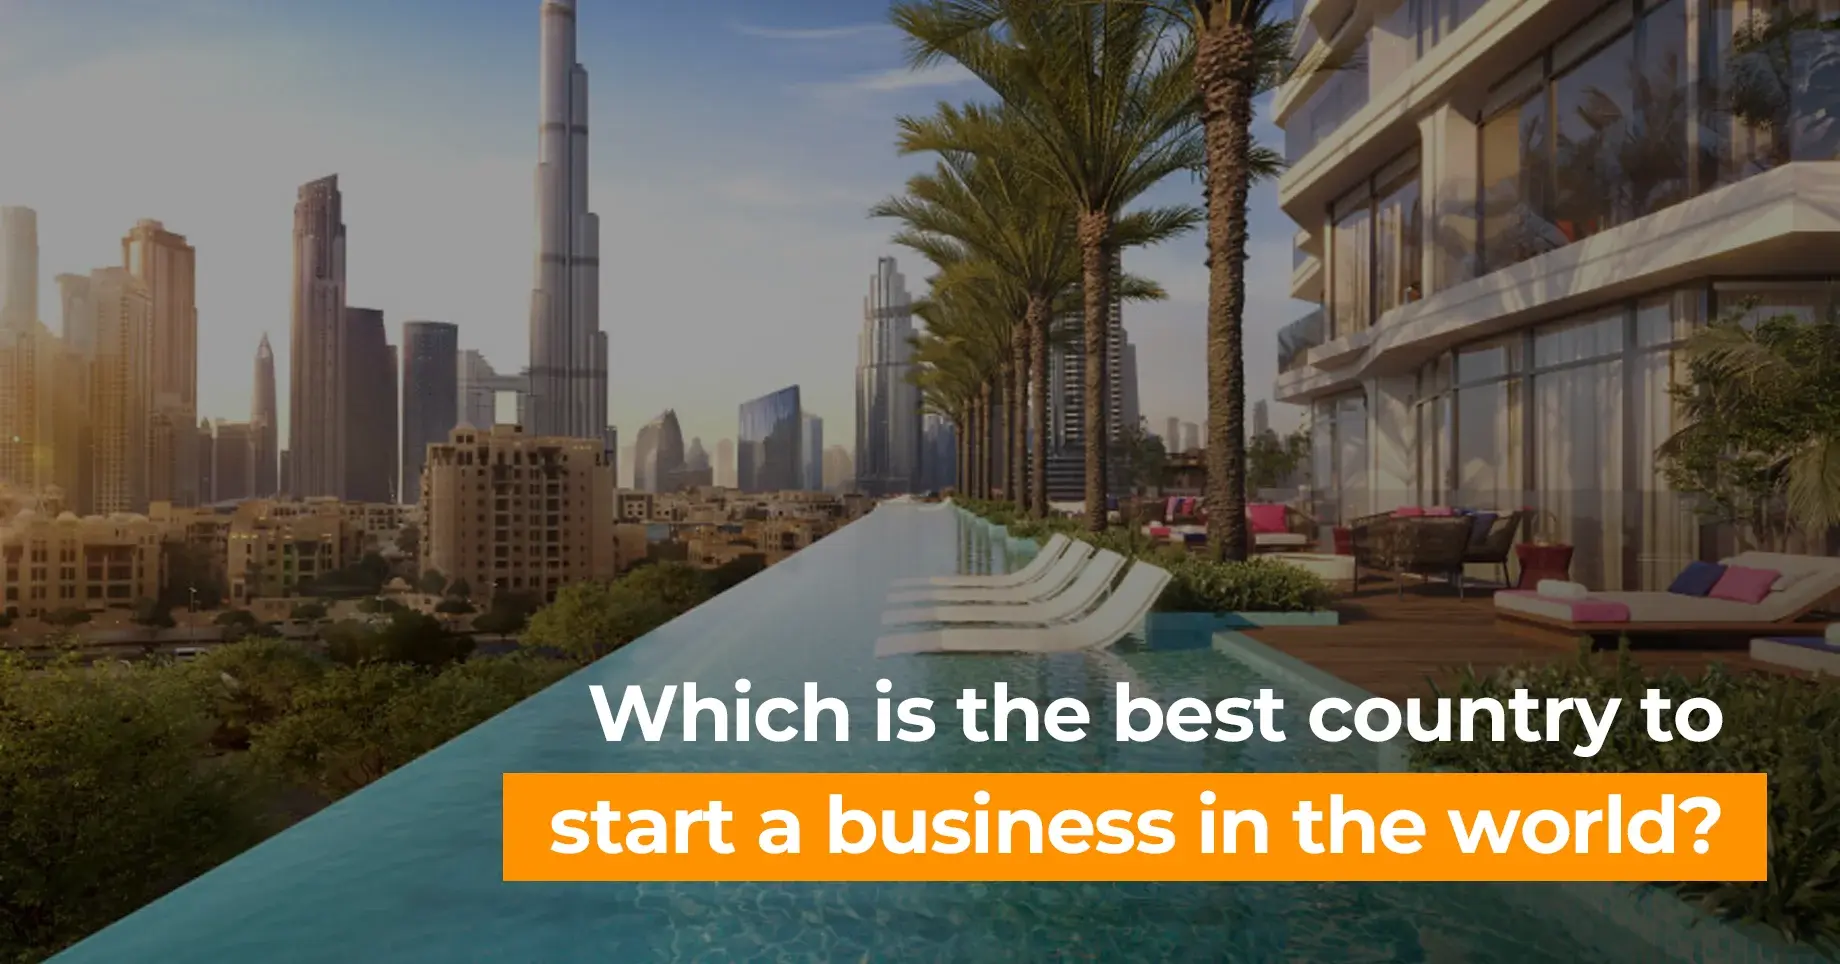 Which is the best country to start a business in the world?